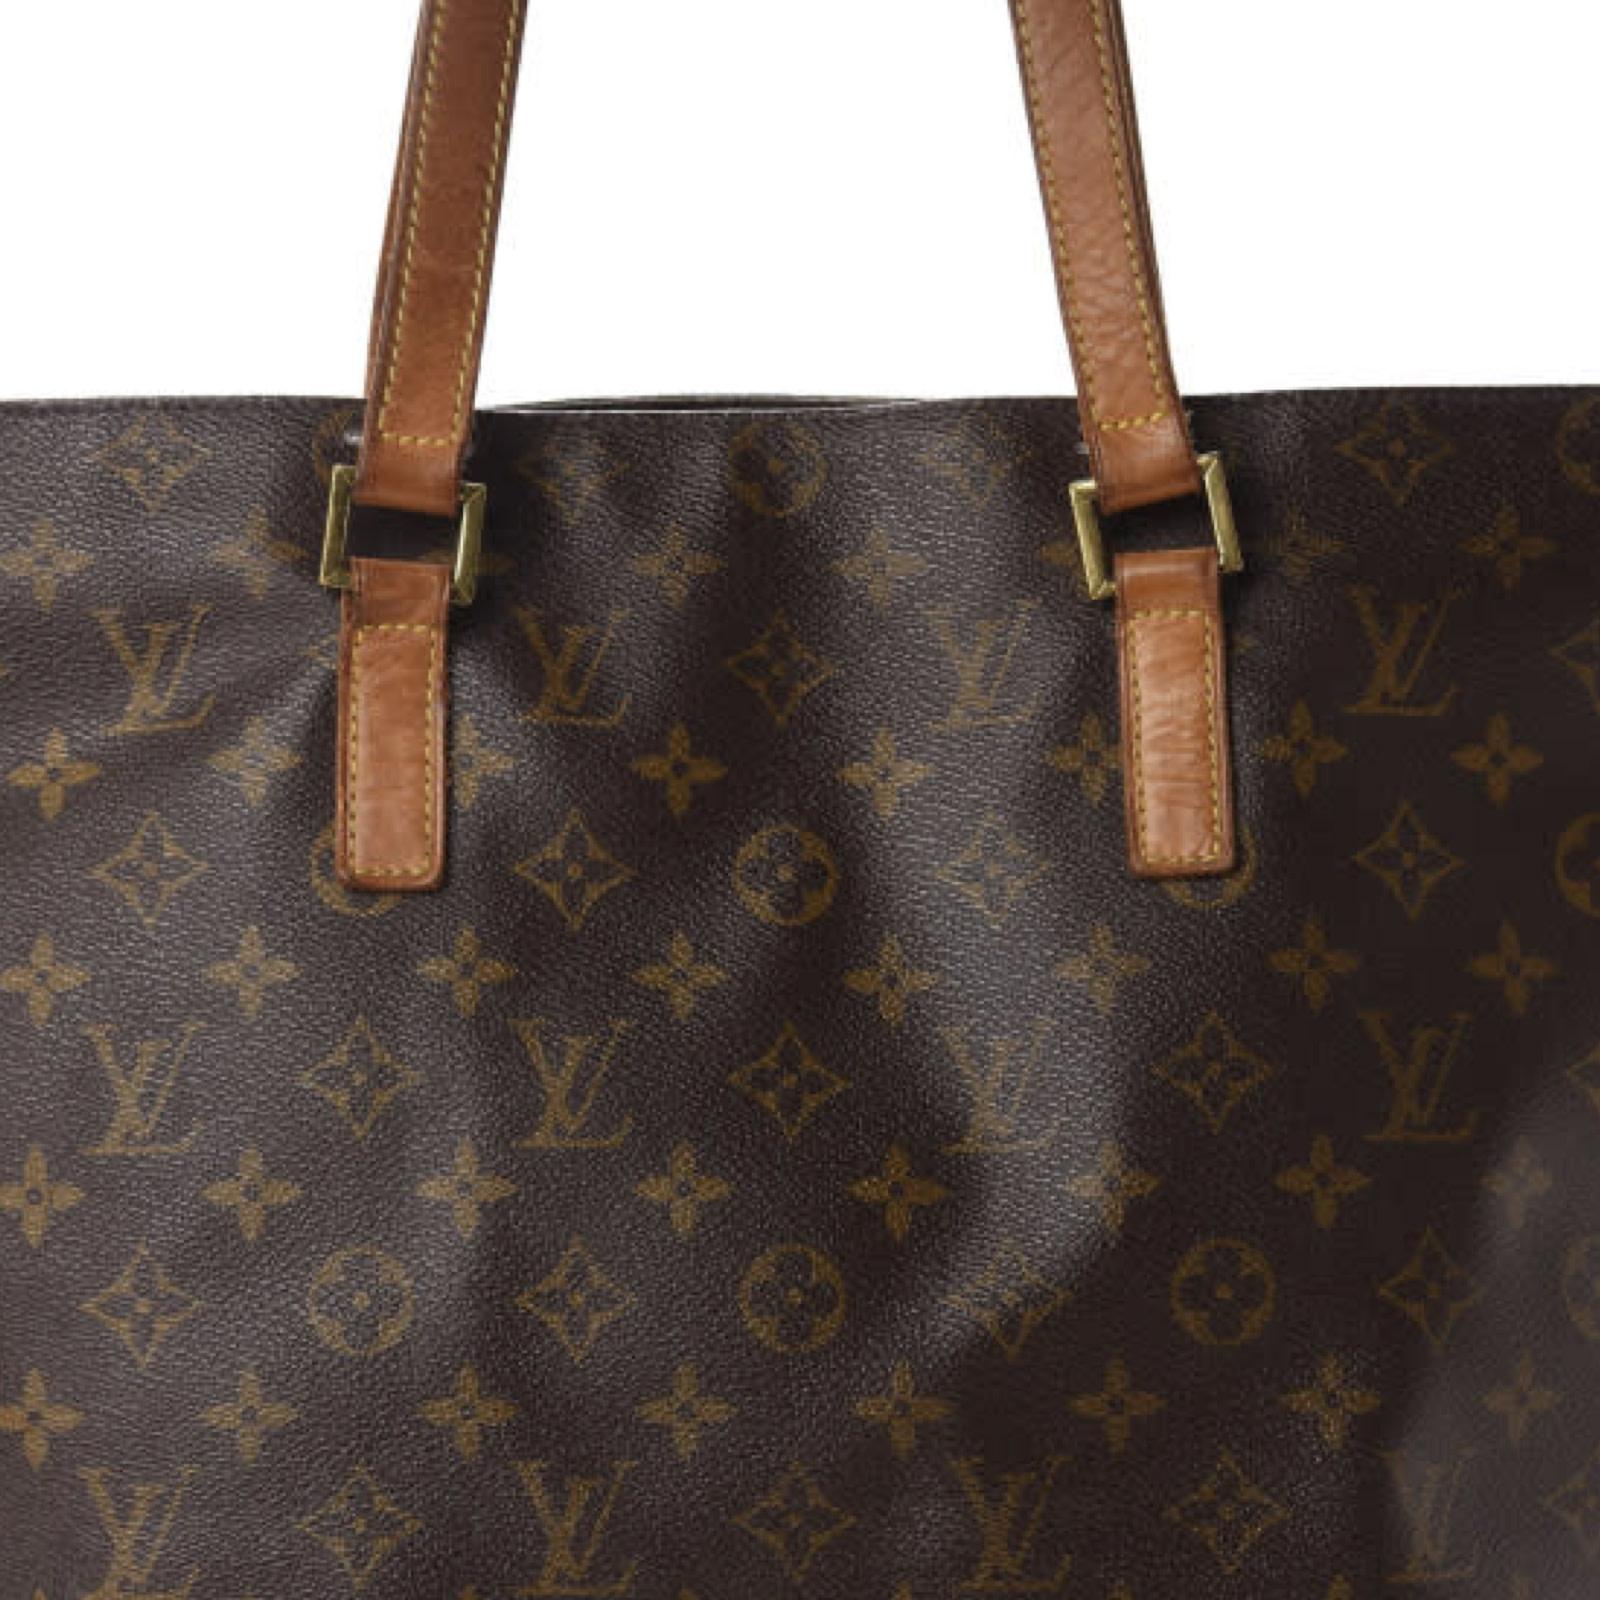 This shoulder bag is made of signature Louis Vuitton monogram coated canvas. The bad features vachetta cowhide leather shoulder straps, a flat vachetta base, and polished brass hardware. This tote bag has an open top with brown woven fabric interior